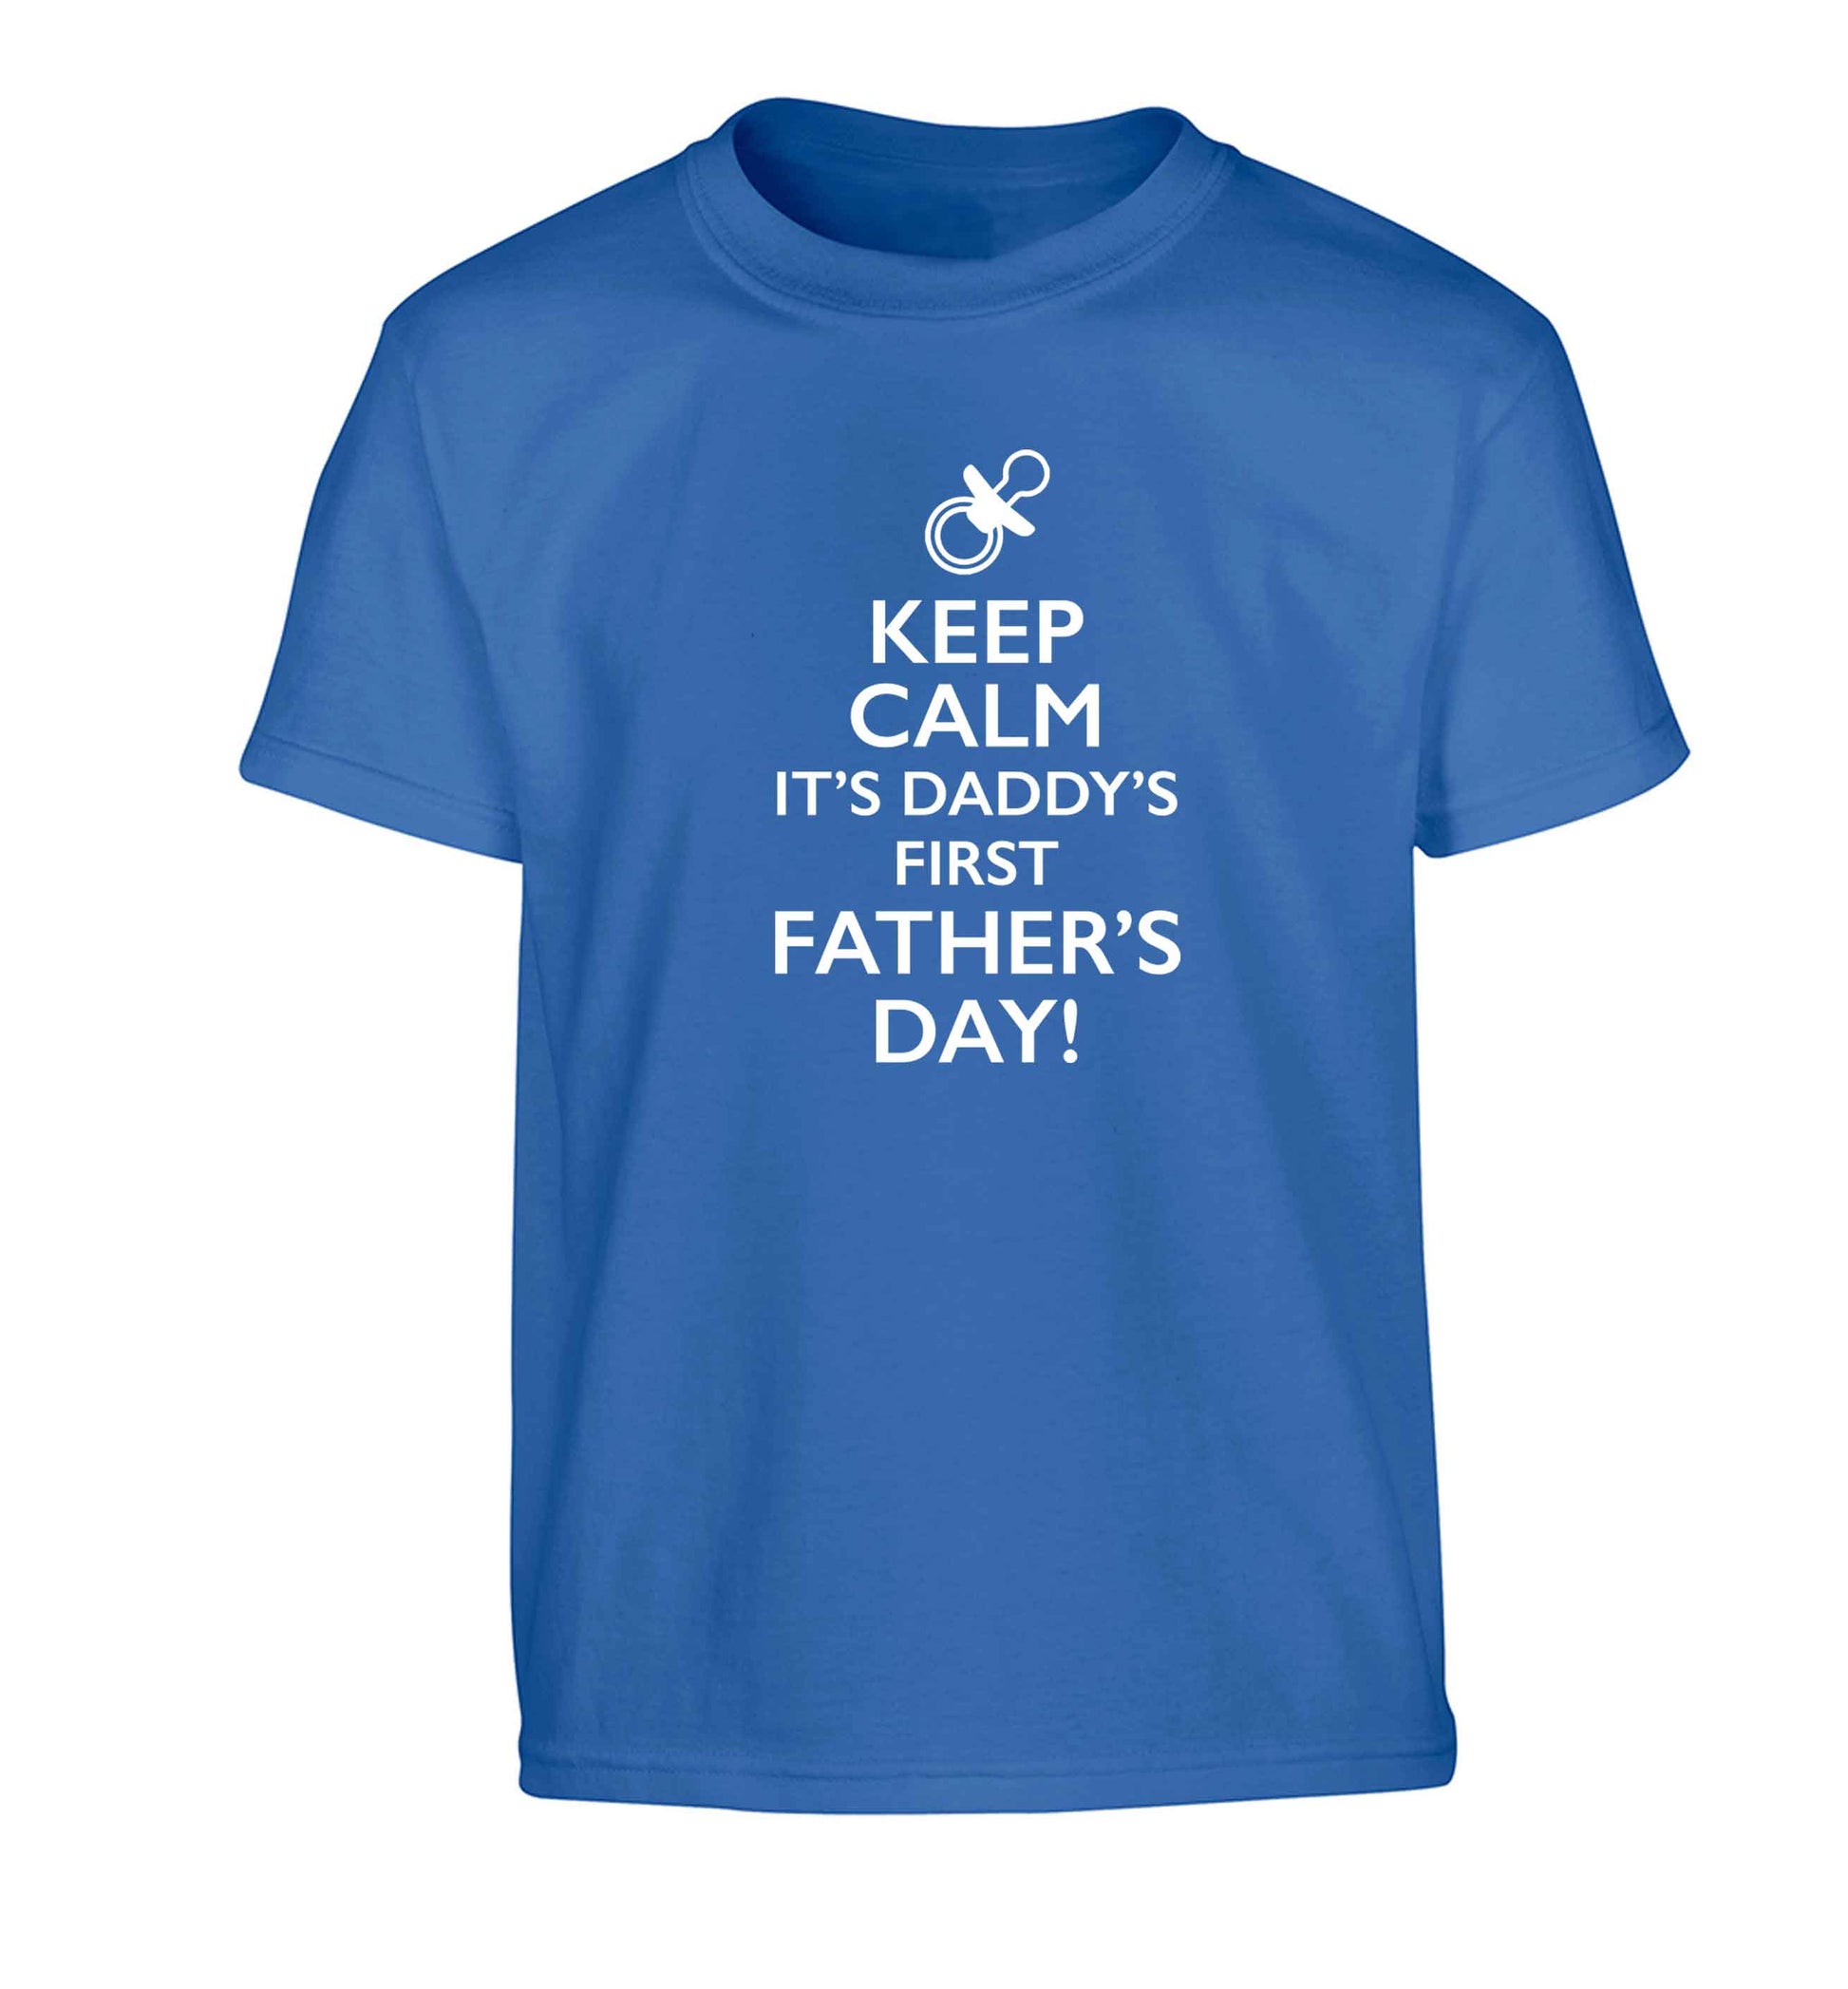 Keep calm it's daddys first father's day Children's blue Tshirt 12-13 Years